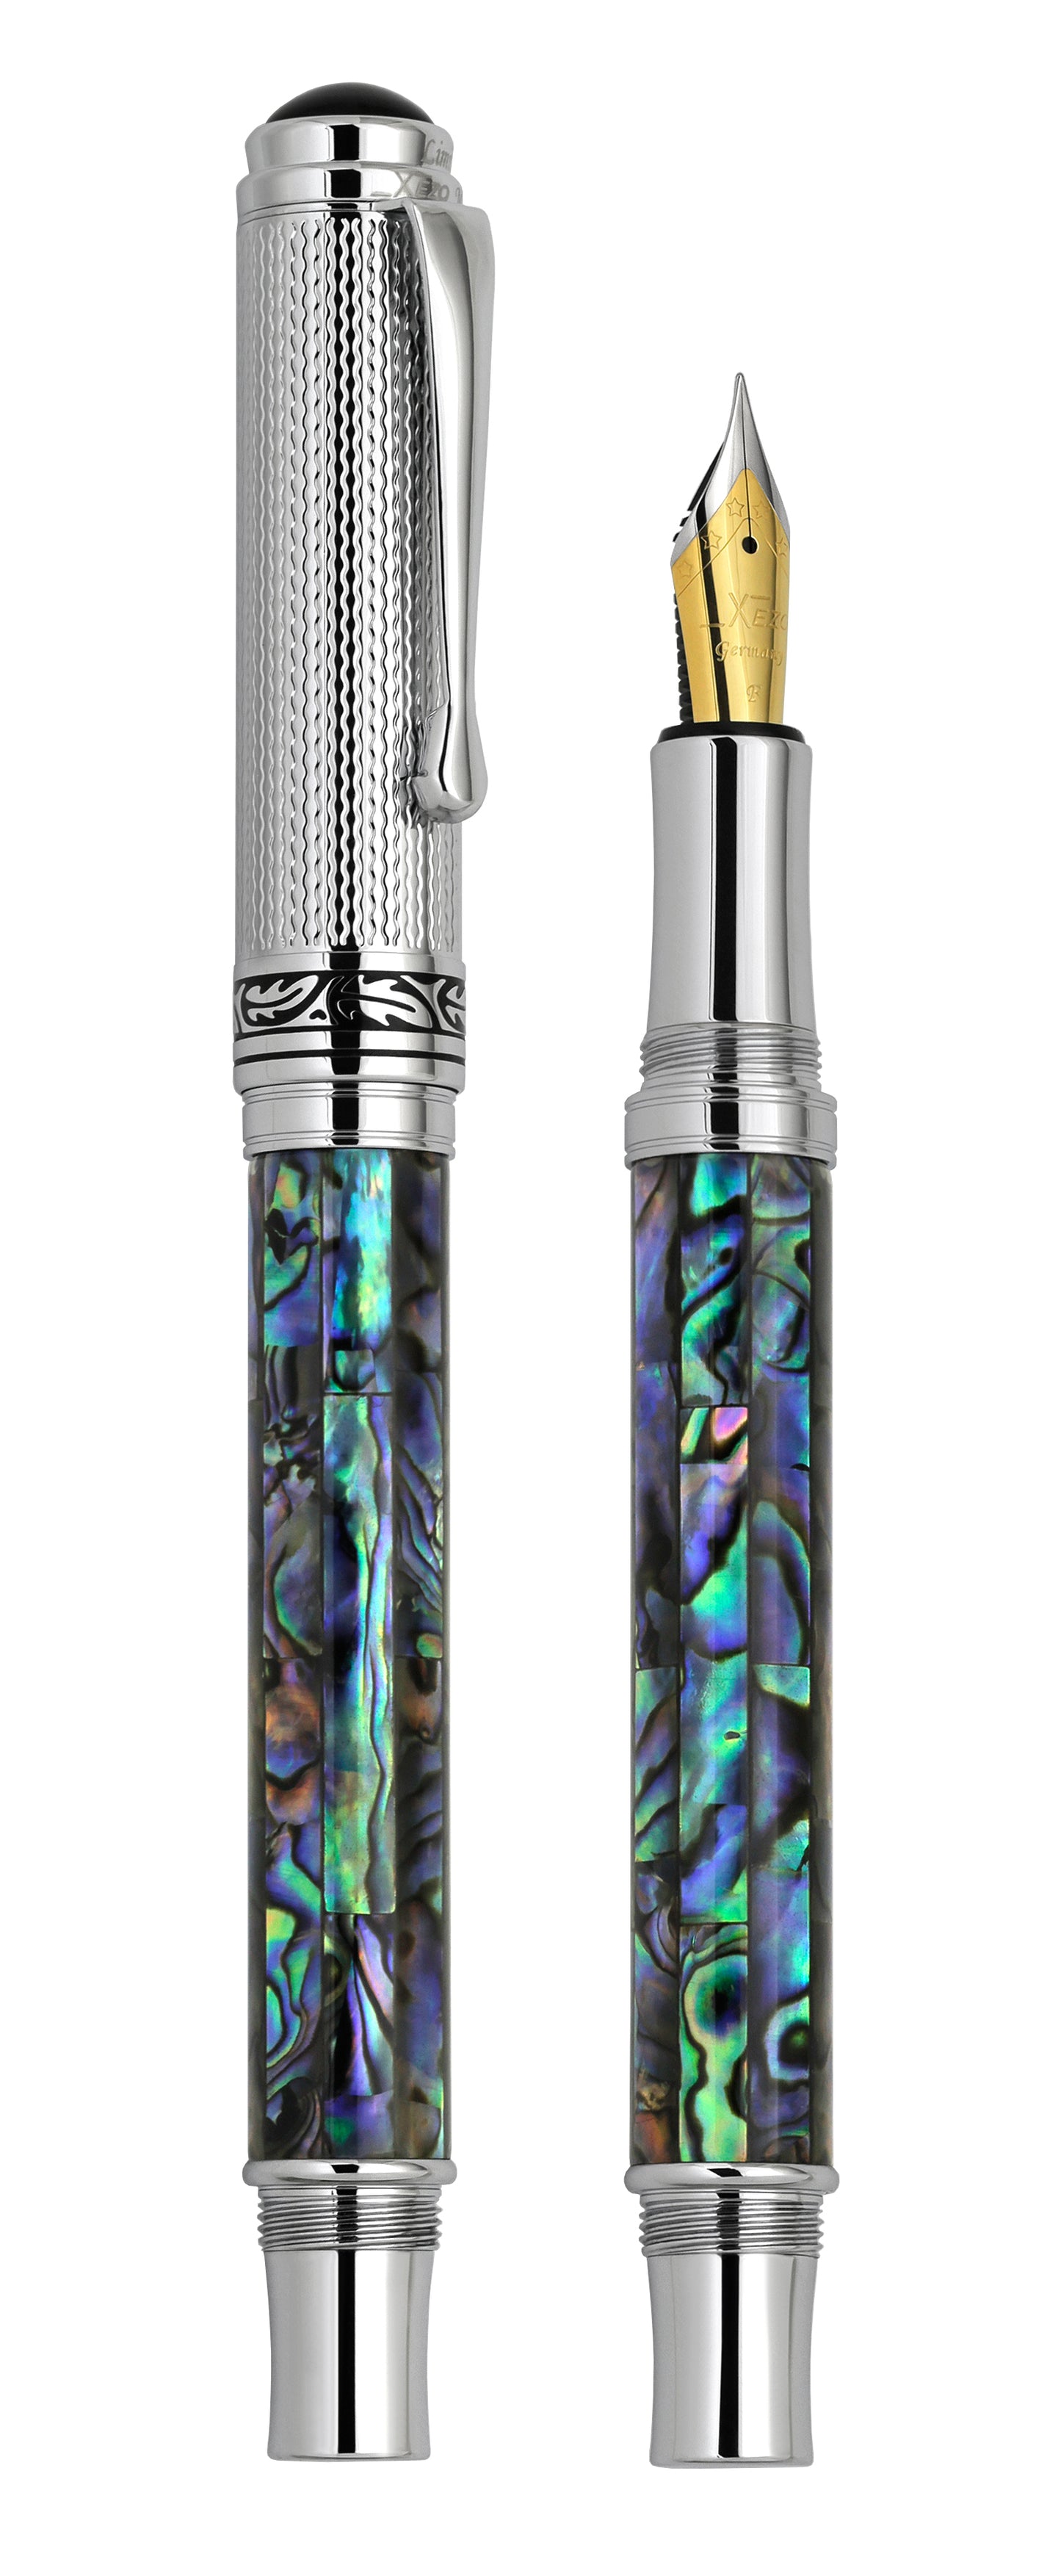 Xezo - Vertical view of two Maestro Paua Abalone Chrome F fountain pens. The pen on the left is capped, and the pen on the right has no cap